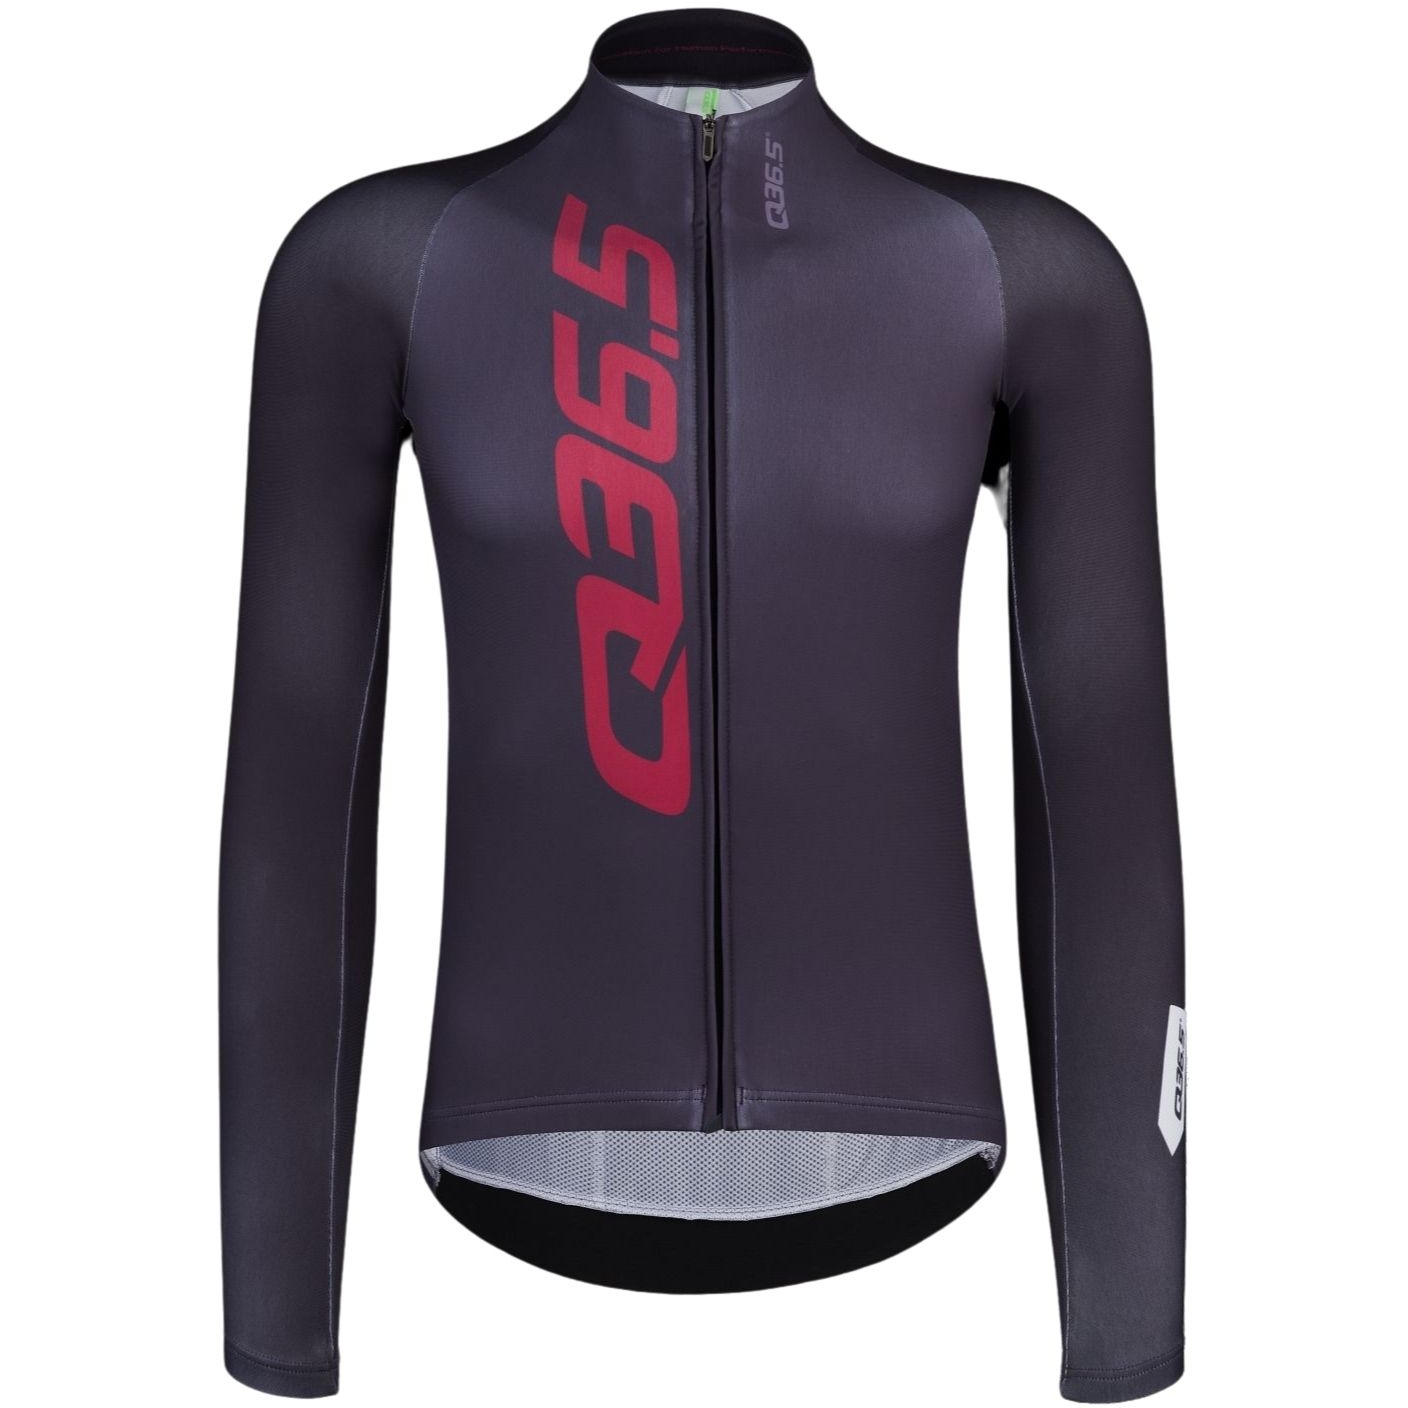 Picture of Q36.5 R2 Signature Long Sleeve Jersey - dark grey